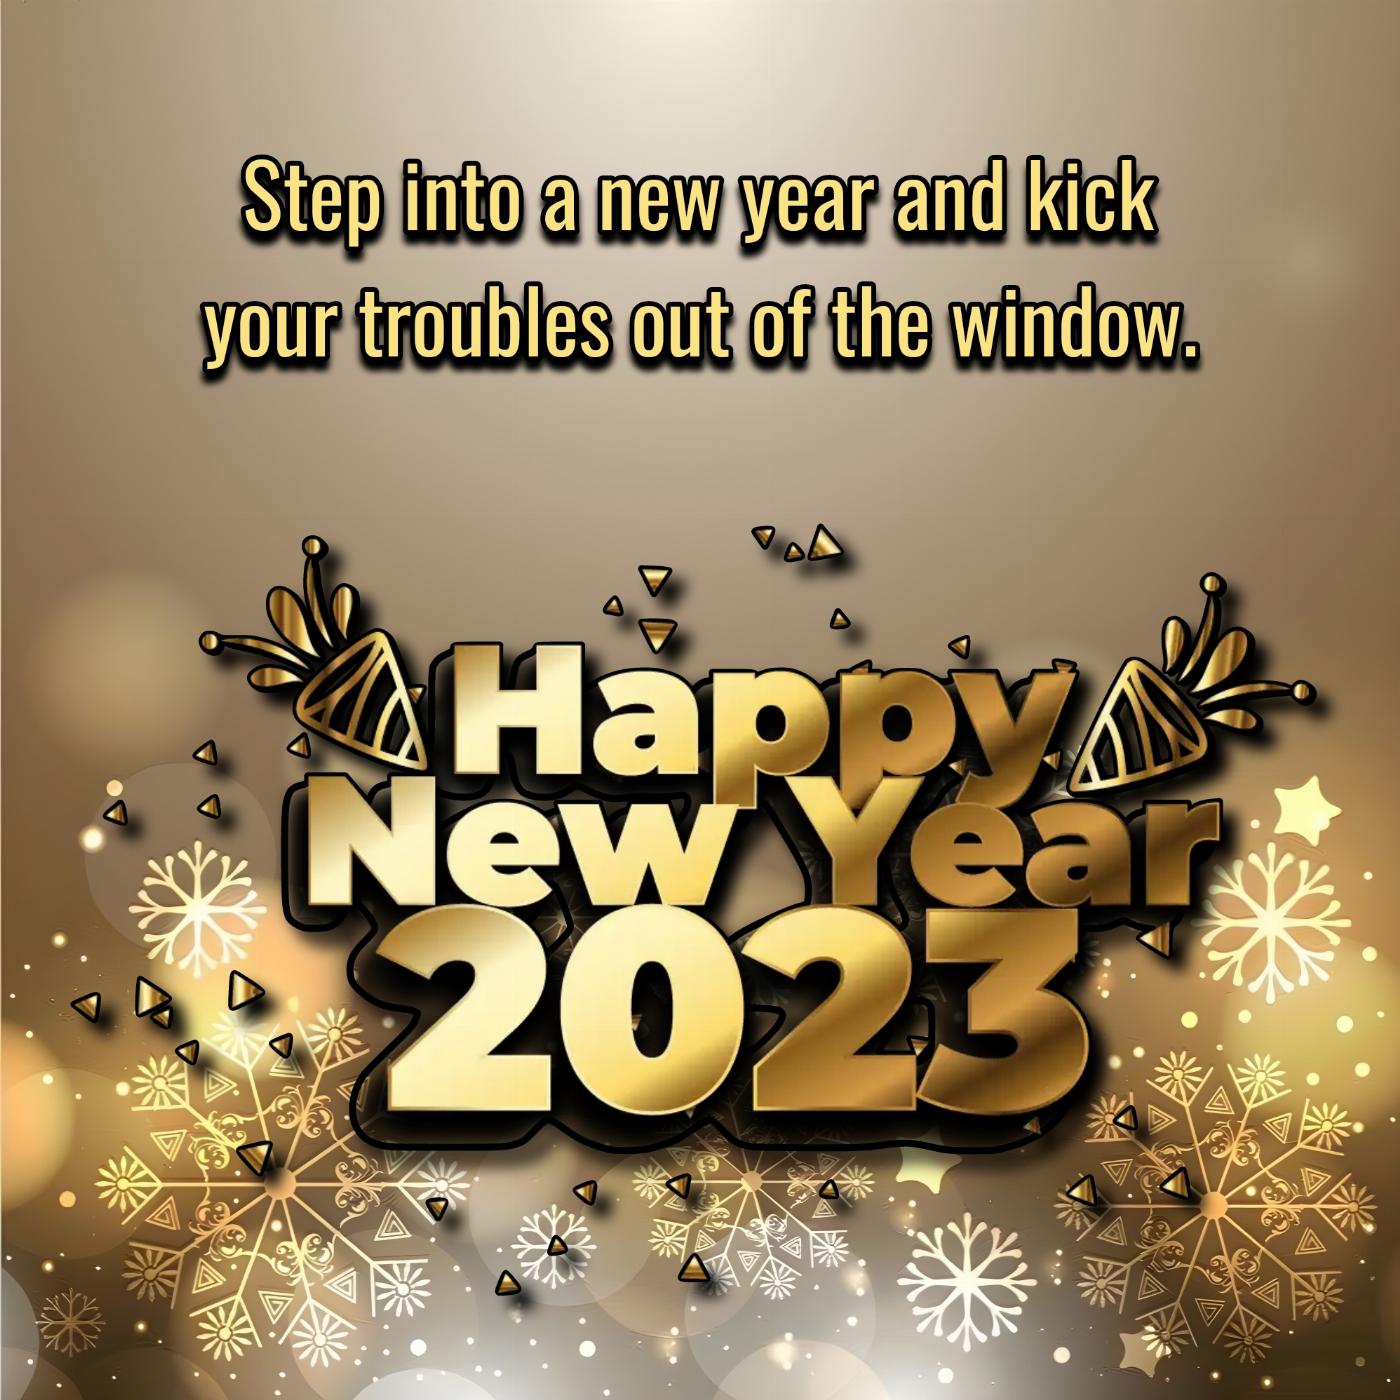 Step into a new year and kick your troubles out of the window